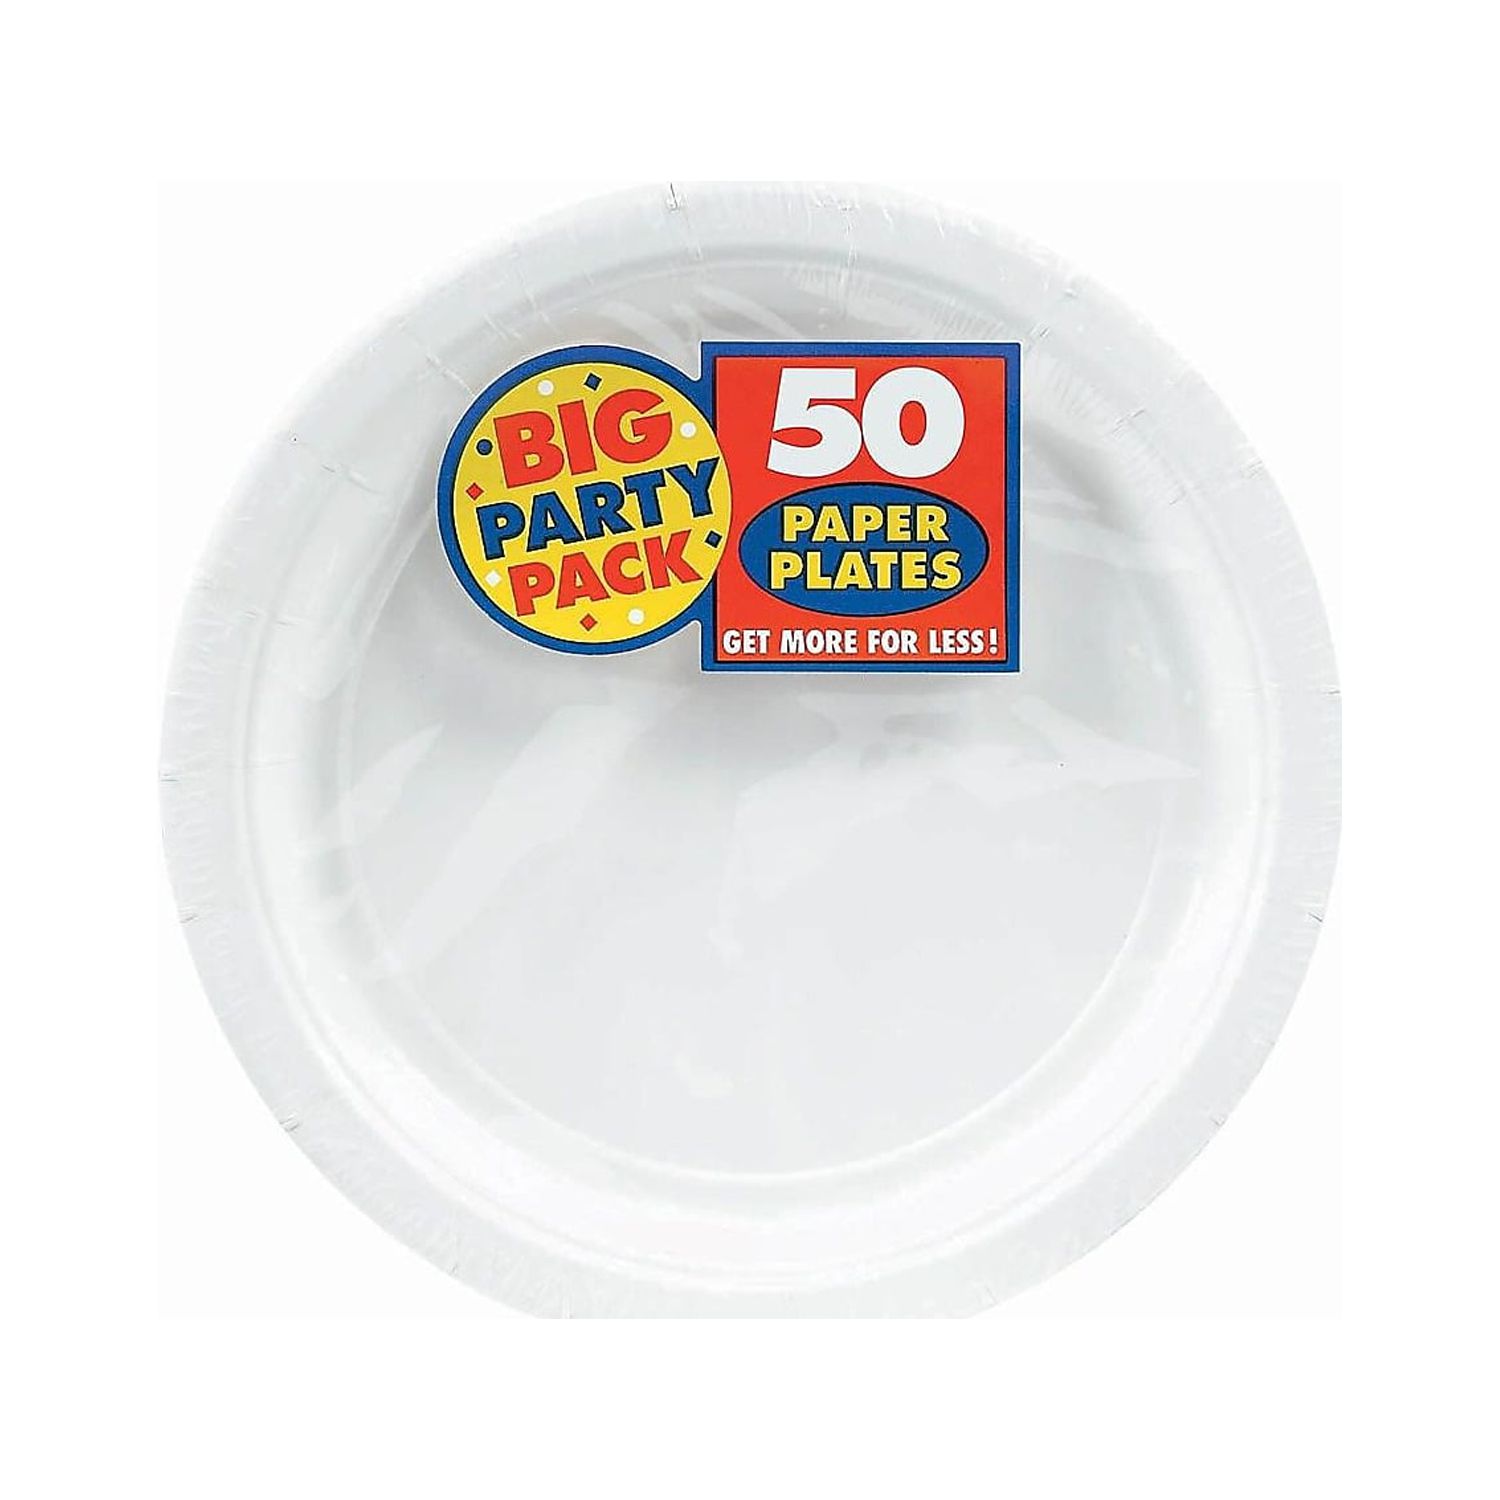 9" Paper Lunch Plates, White, 50 ct - image 1 of 2